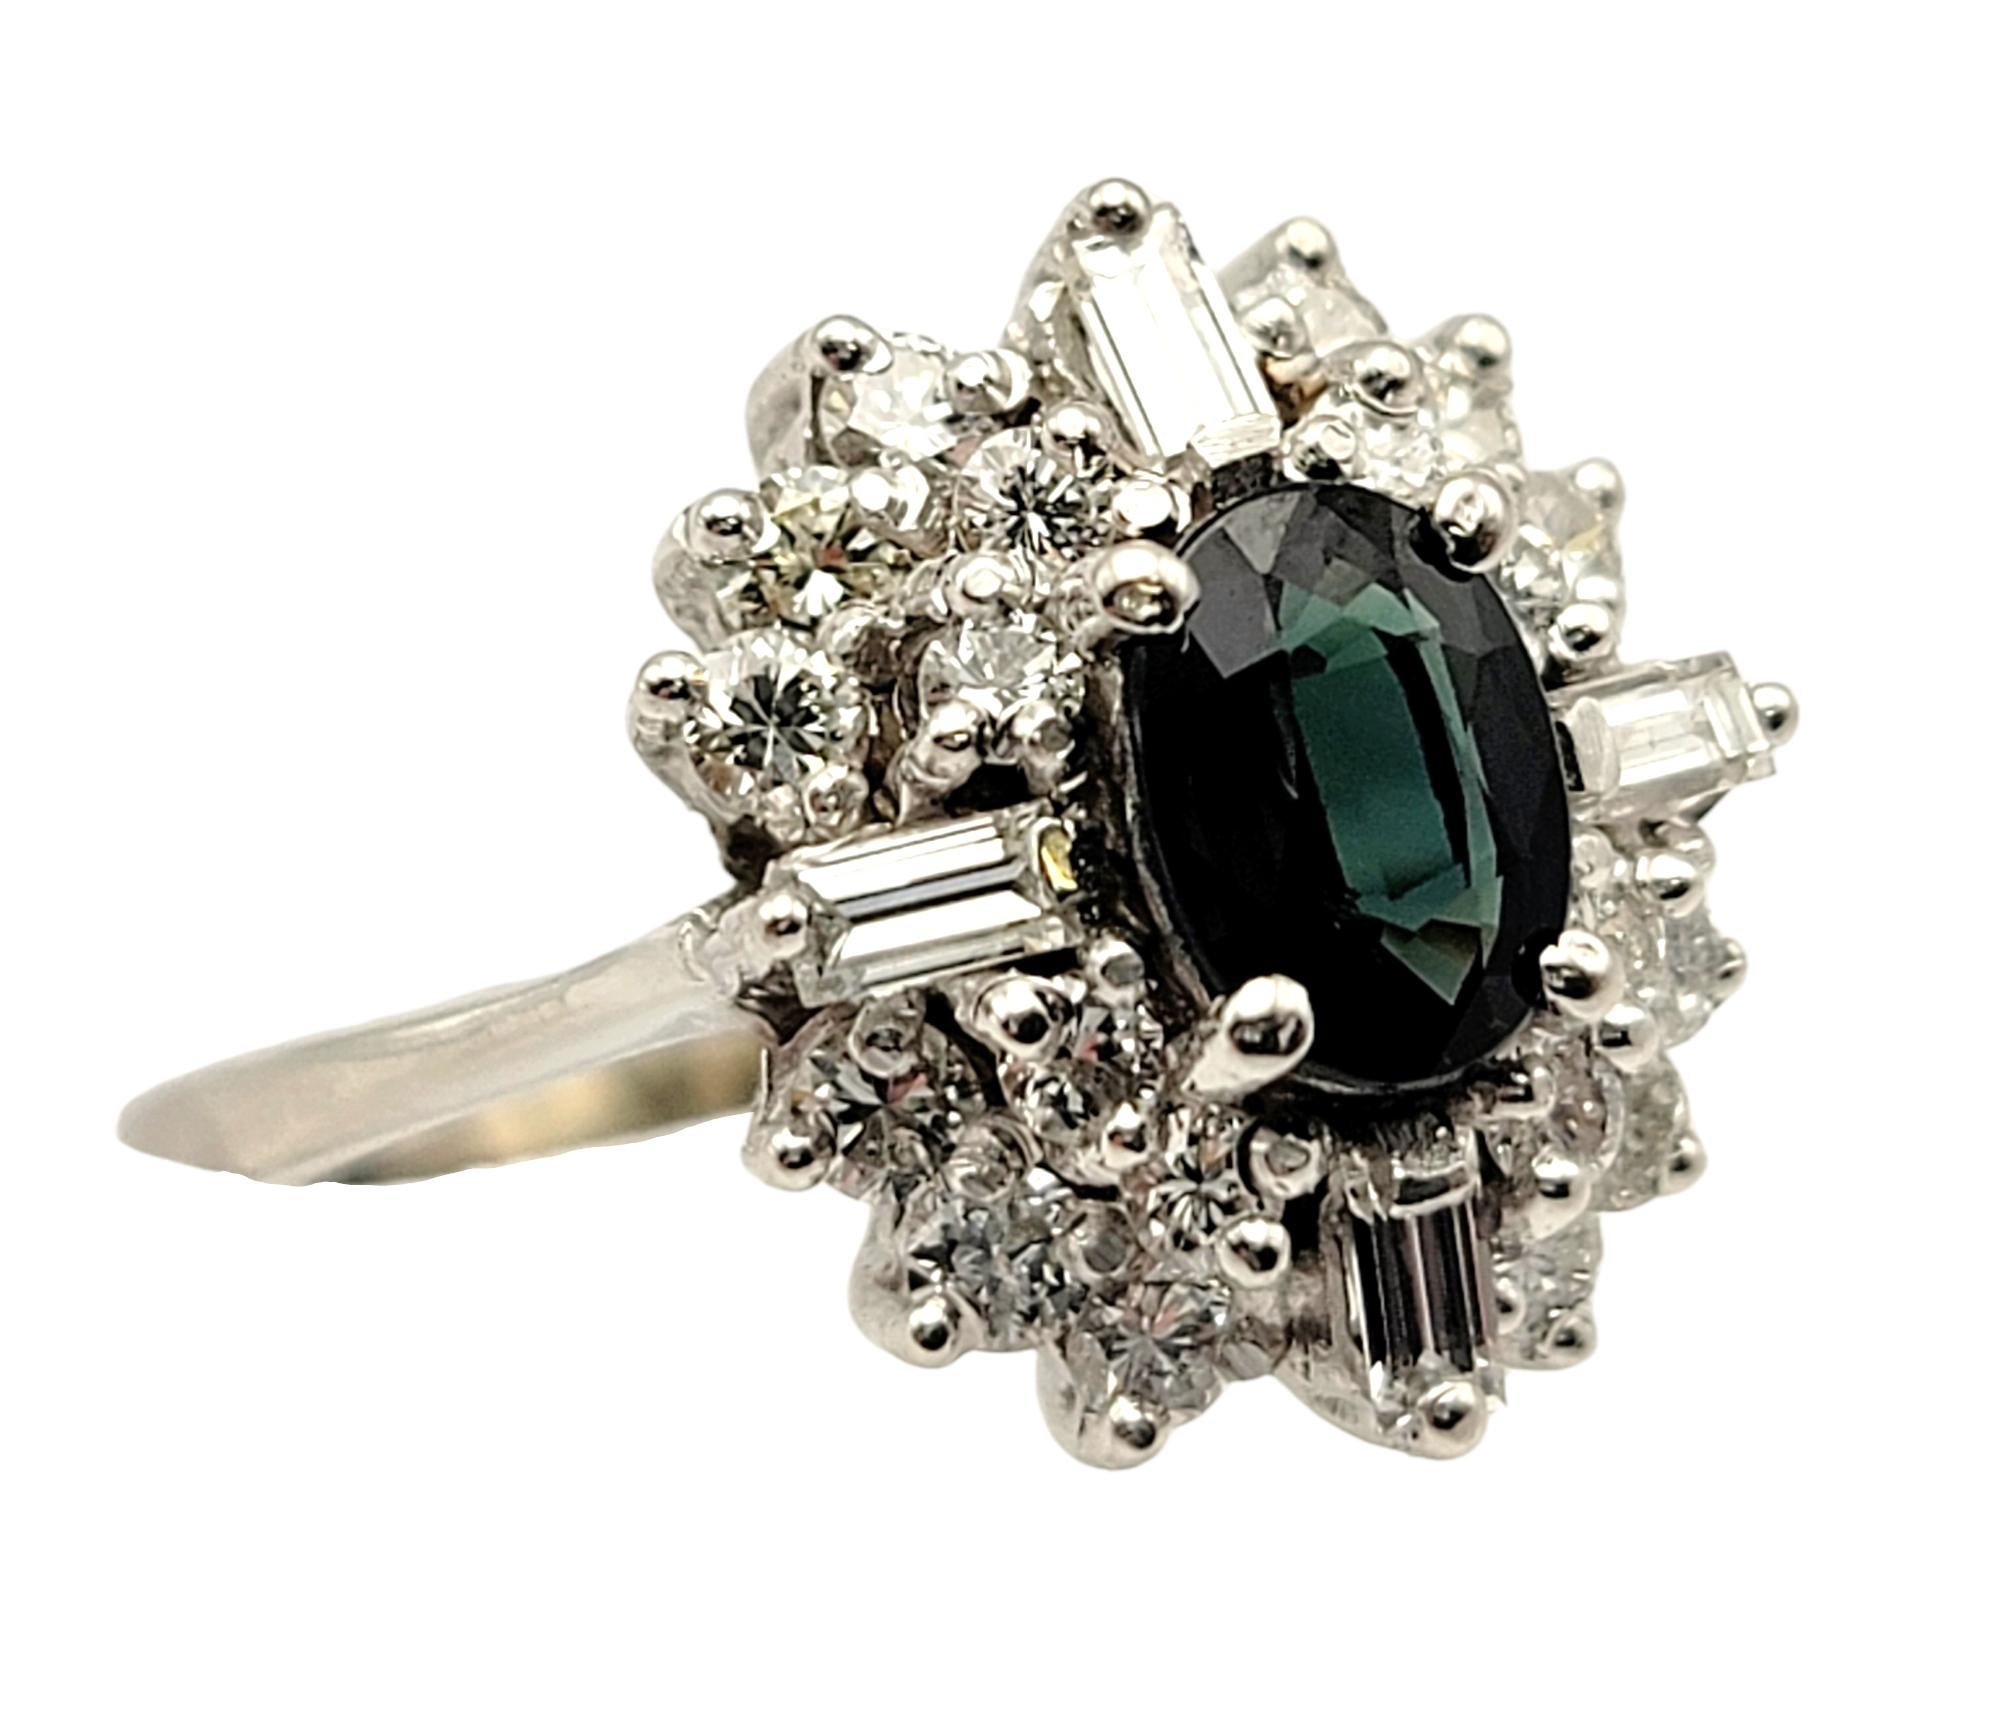 Ring size 5.25

Stunningly sparkly diamond halo ring with a lovely blueish-green chrome diopside center. The colored stone really pops against the icy white diamonds and polished white gold finish. A beautiful accent to any look. 

Ring size: